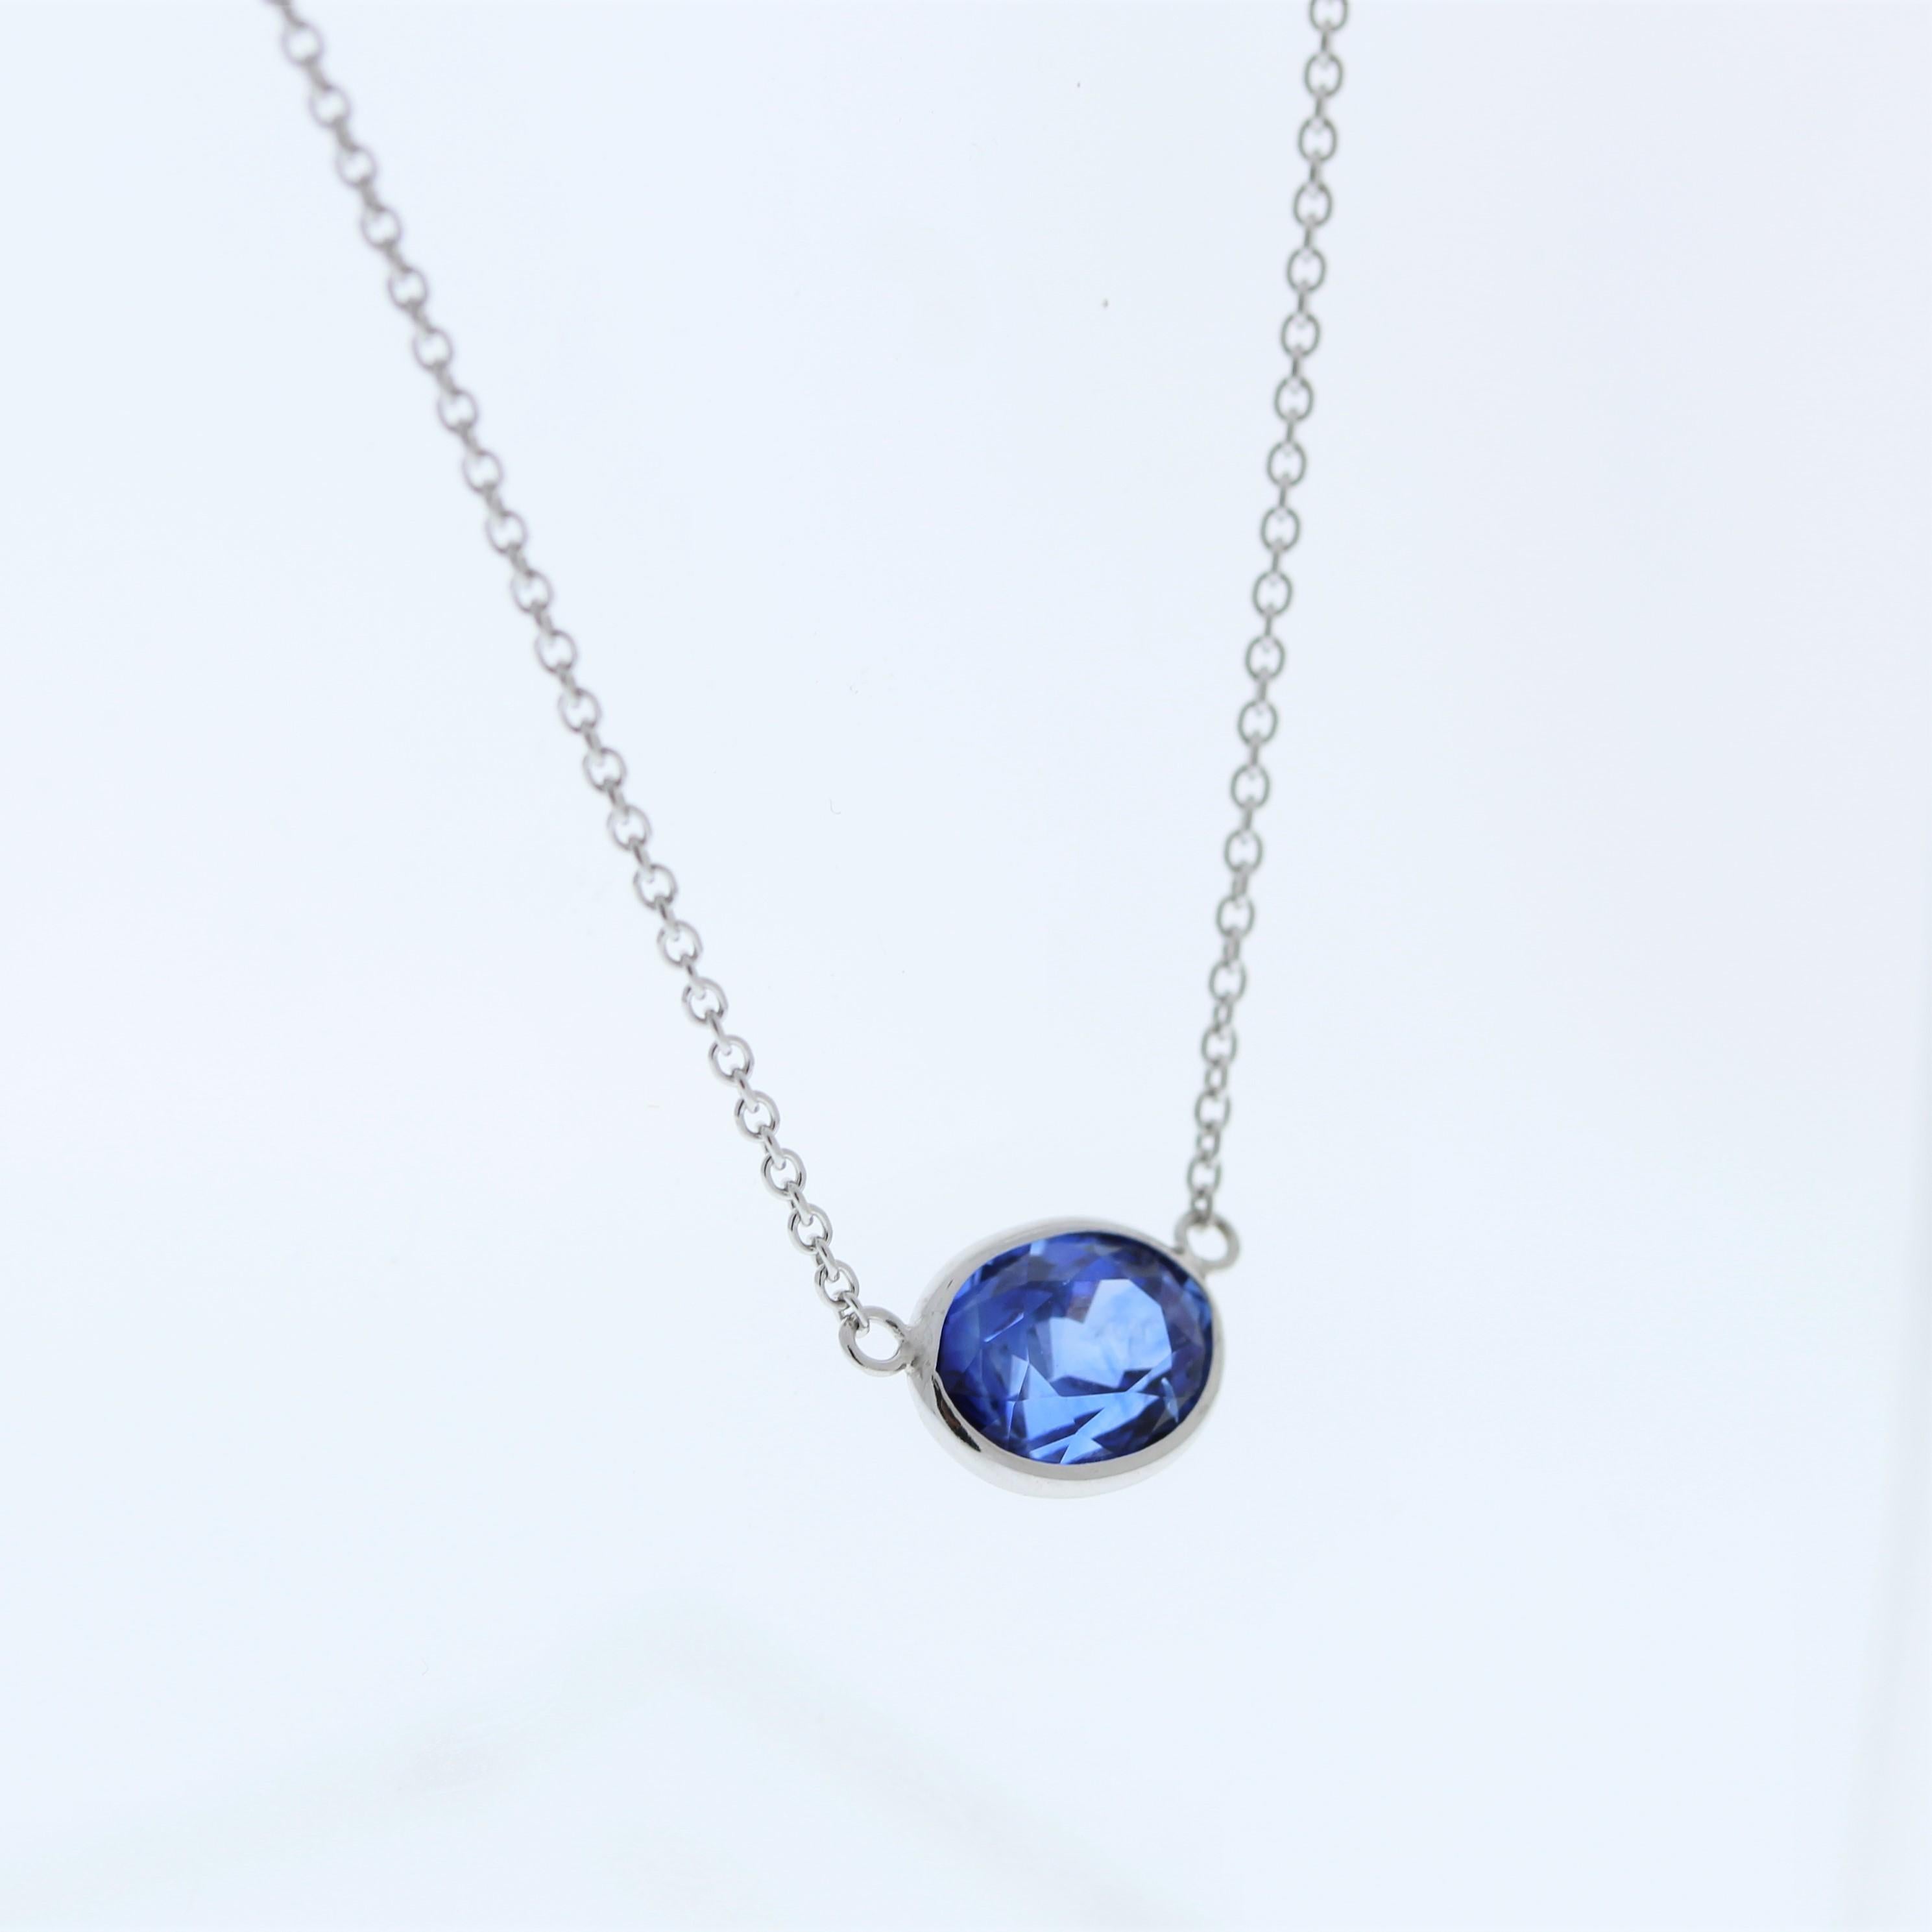 The necklace features a 2.89-carat oval-cut blue sapphire set in a 14 karat white gold pendant or setting. The blue sapphire against the white gold is likely to create an elegant and eye-catching contrast, making this necklace a versatile and